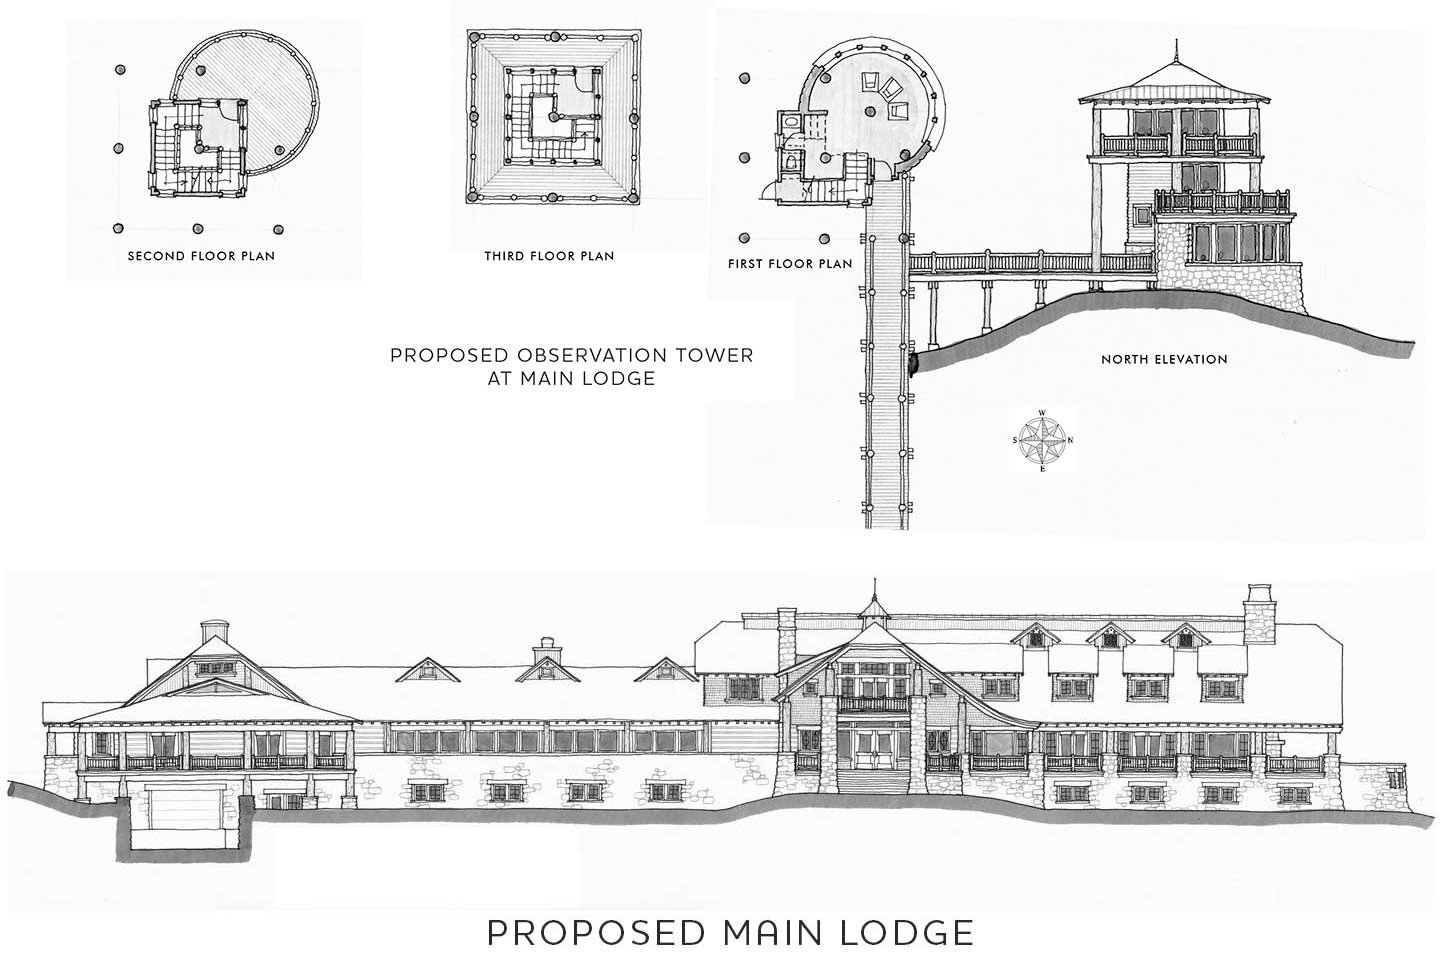 Proposed hand-drawn plans for lodge and tower